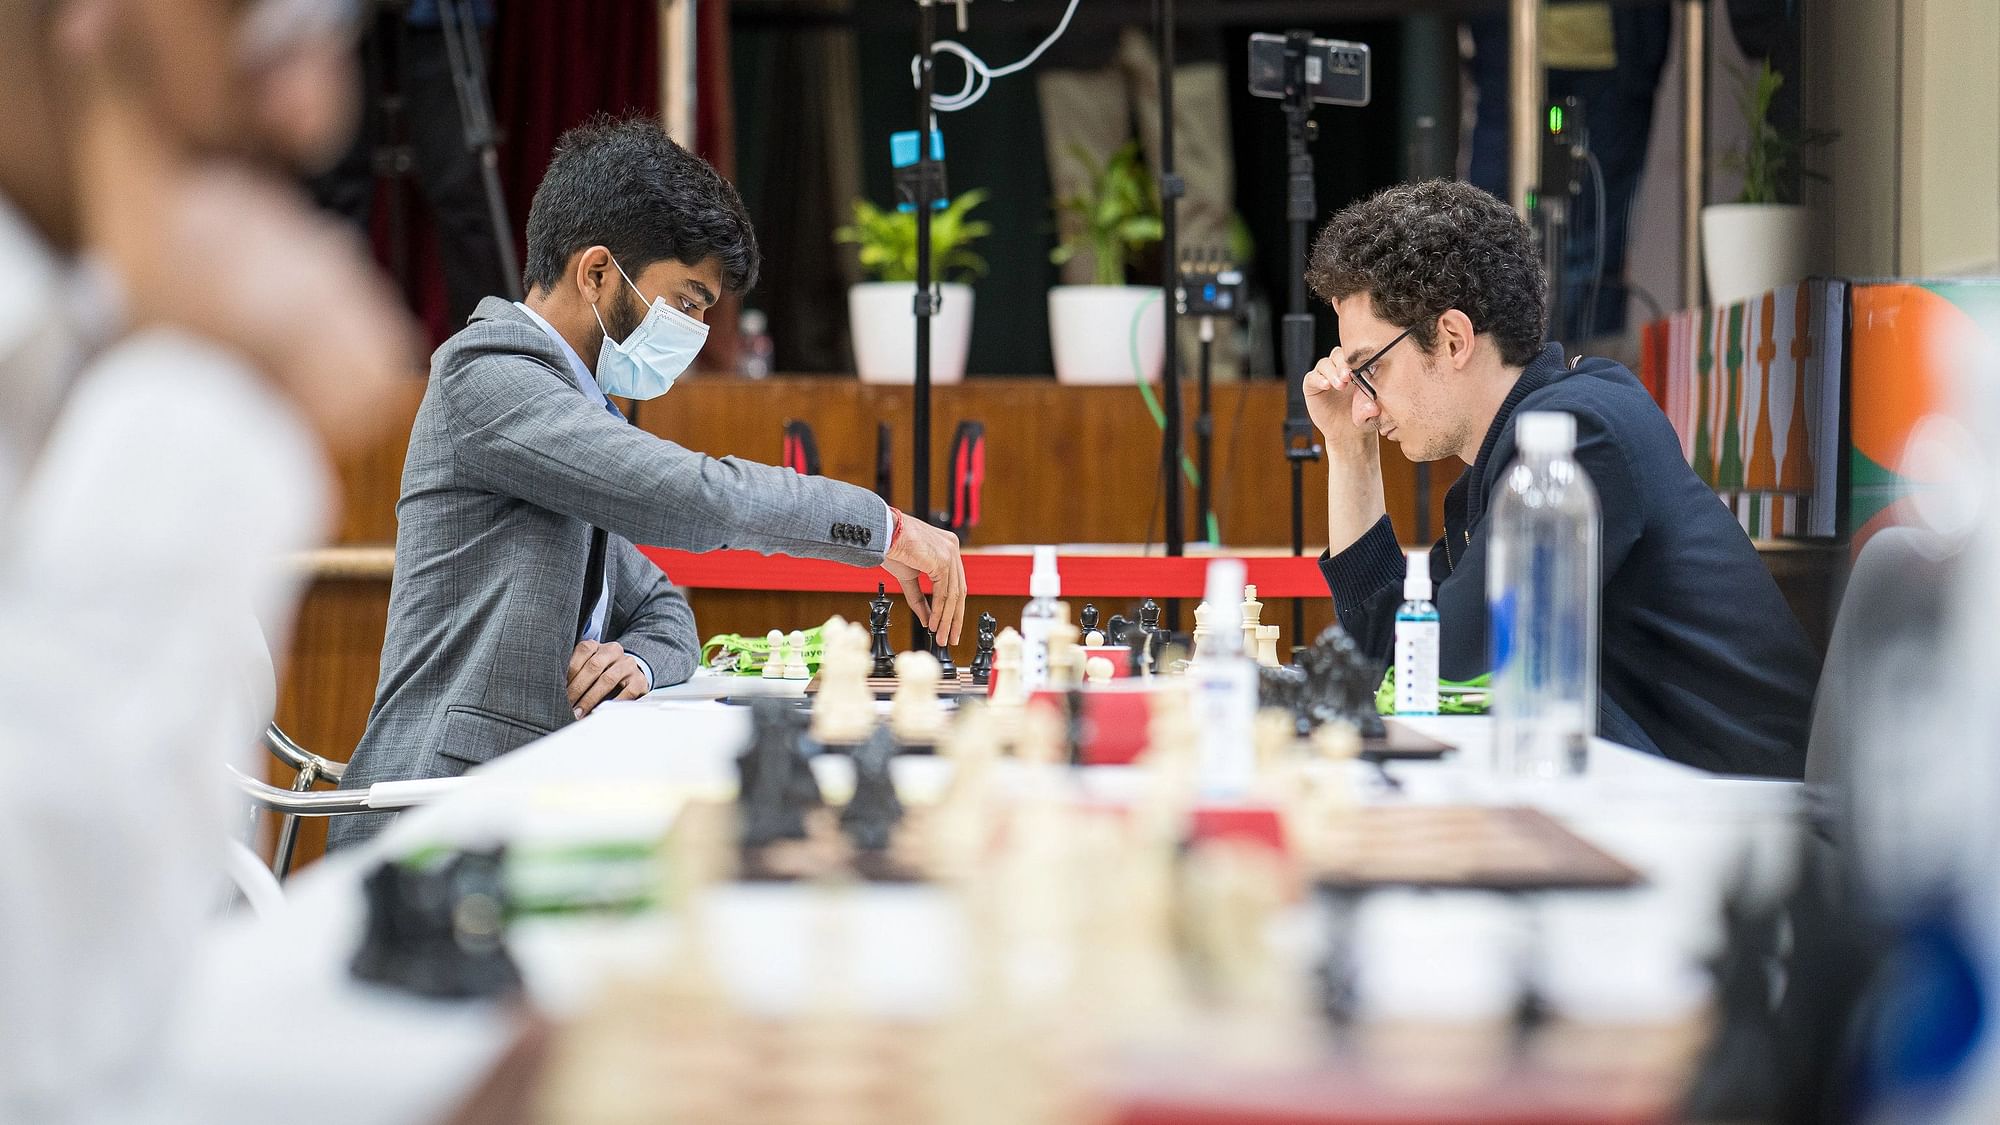 Gukesh Defeats Caruana In India's Win Over Top Seed US In Chess Olympiad